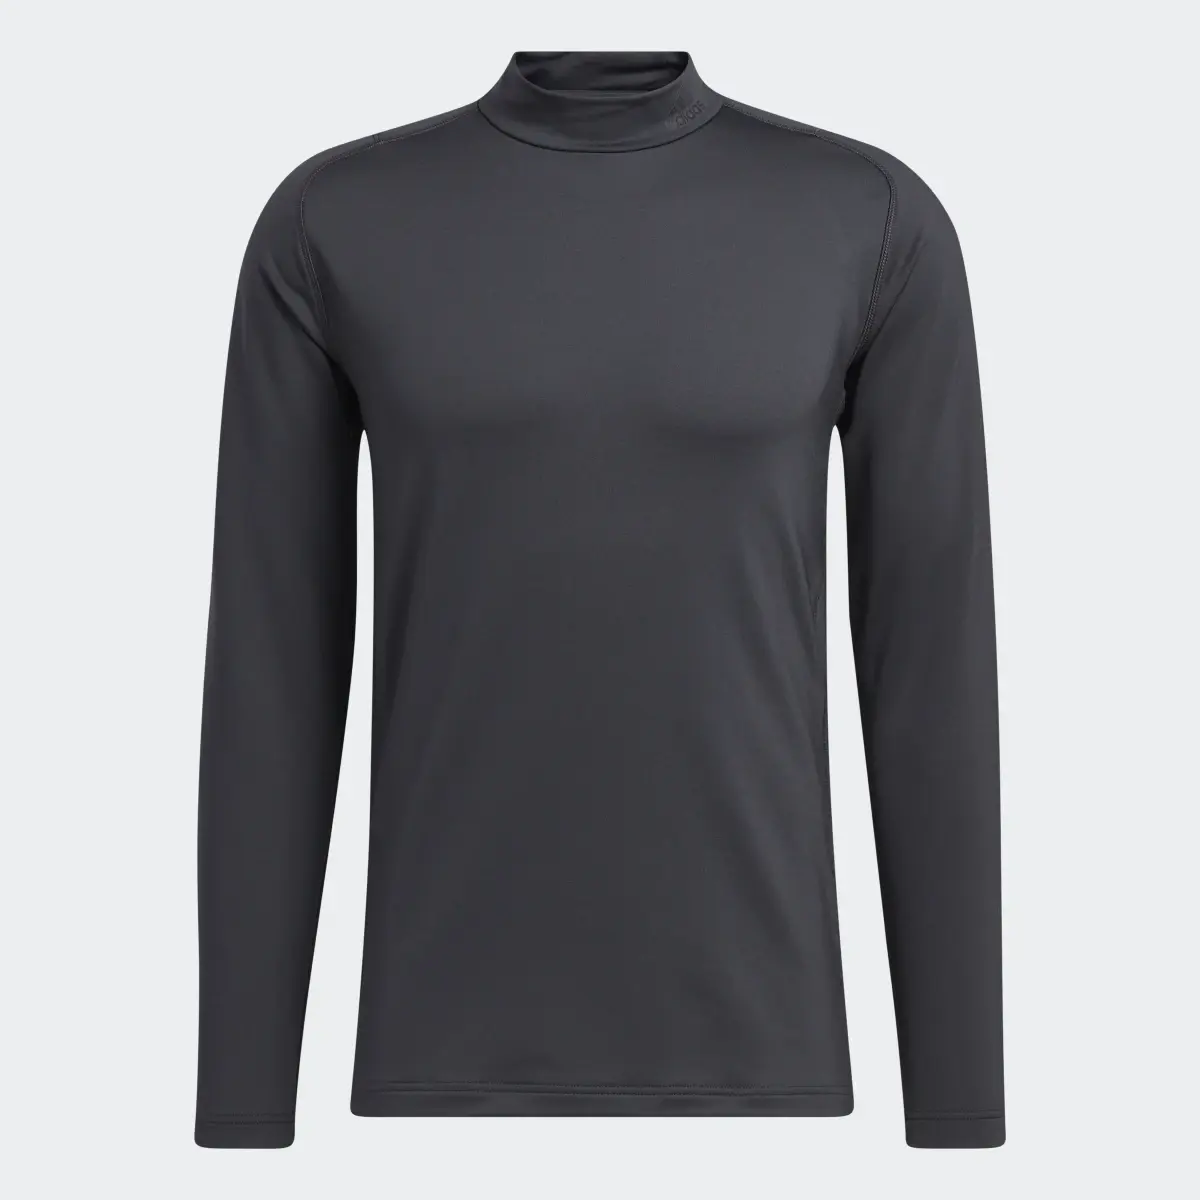 Adidas Sport Performance Recycled Content COLD.RDY Baselayer. 1